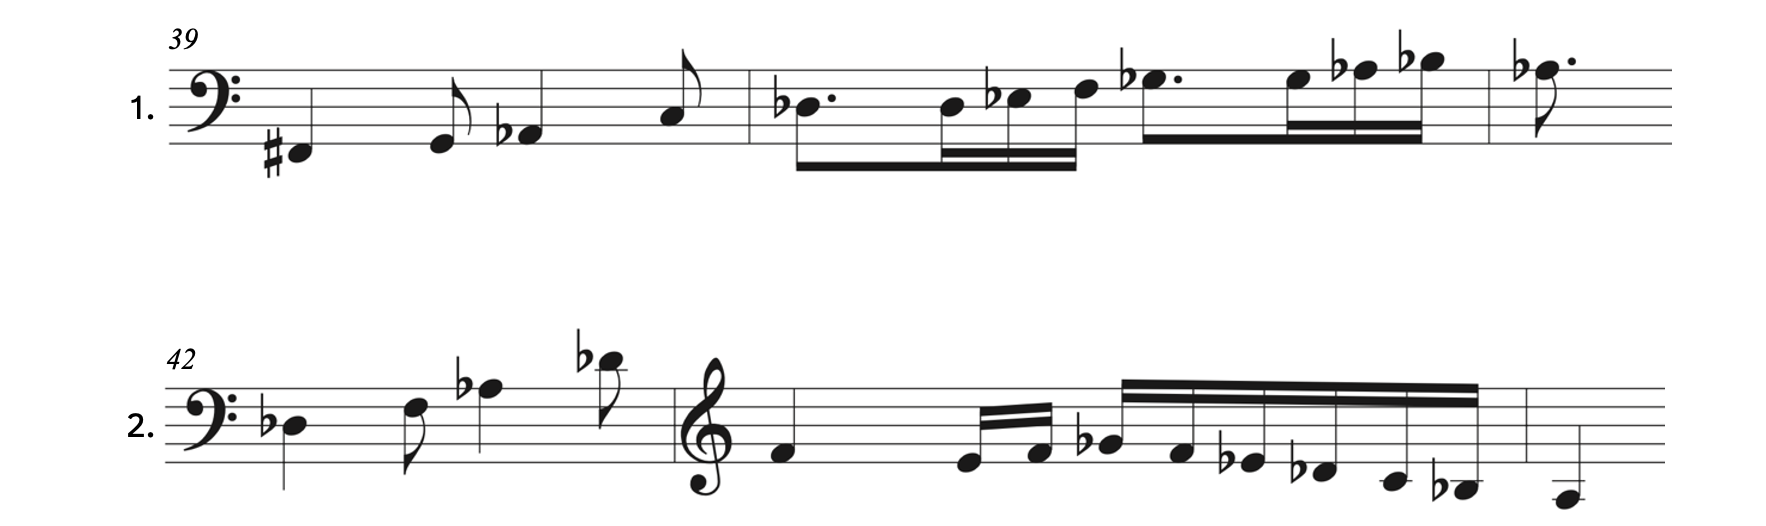 Identify half steps in examples from Szymanowska Sérénade for Cello and Piano. Number 1 pitches are the following: Measure 39 has F-sharp, G, A-flat and C. Measure 40 has D-flat, D-flat, E-flat, F, G-flat, G-flat, A-flat, and B-flat. Measure 41 has A-flat. Number 2 pitches are the following: Measure 42 has D-flat, F, A-flat, and D-flat. Measure 32 has F, E, F, G-flat, F, E-flat, D-flat, C, and B-flat. Measure 44 has A.